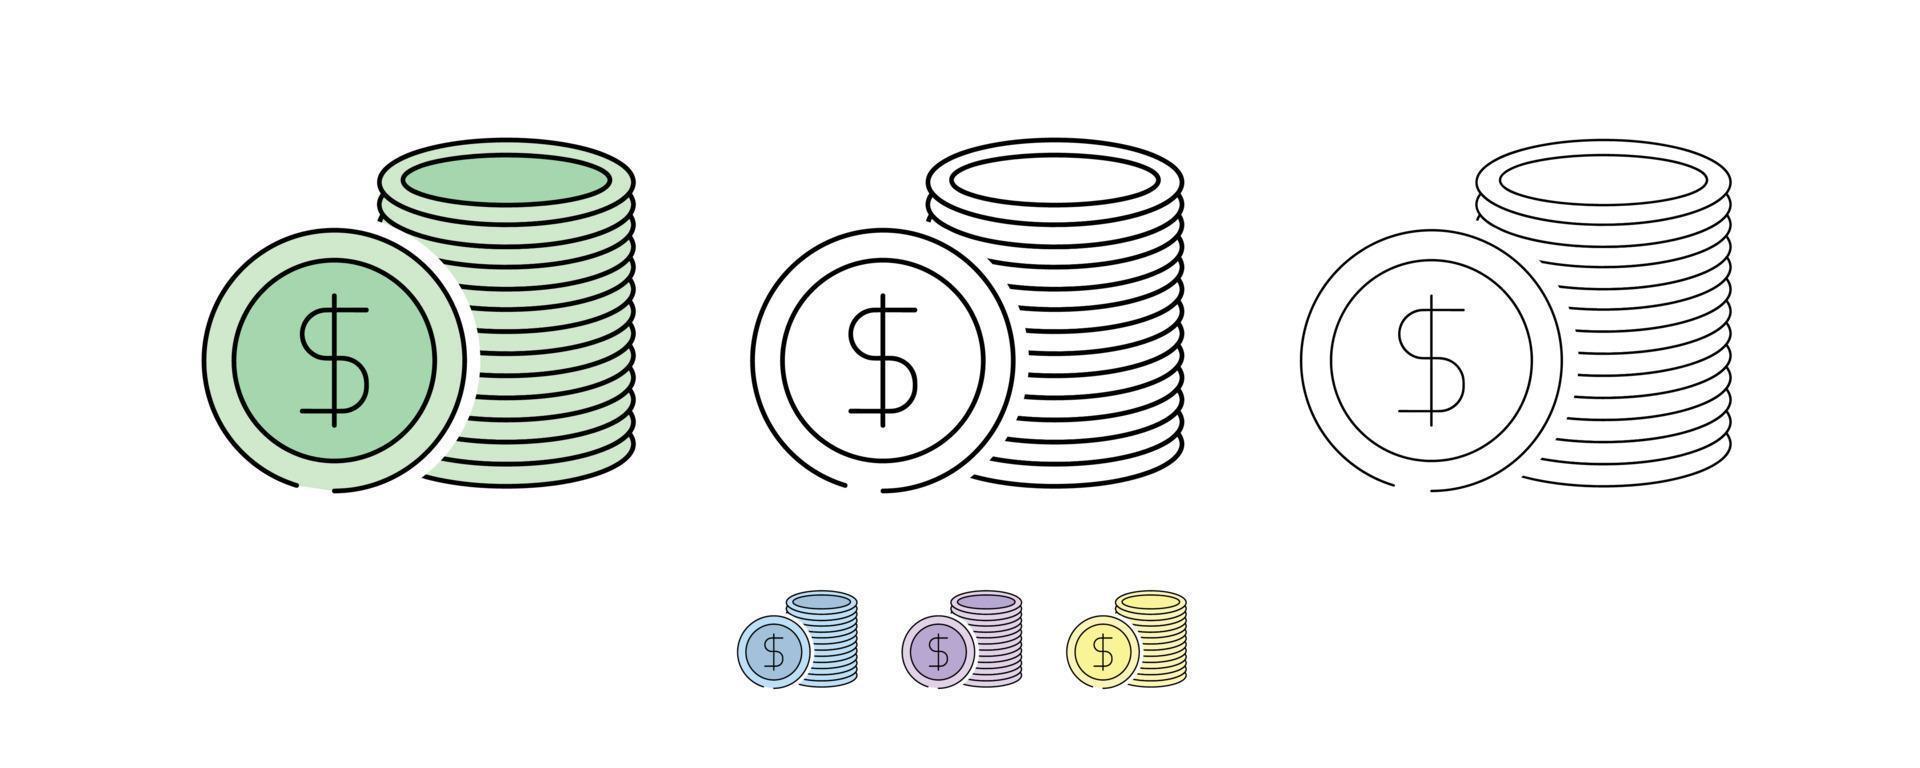 3-coin icon set. Dollar savings earning money, economic money value. Icon set in different colors and different thickness. Money line icons set vector illustration. Modern line art.